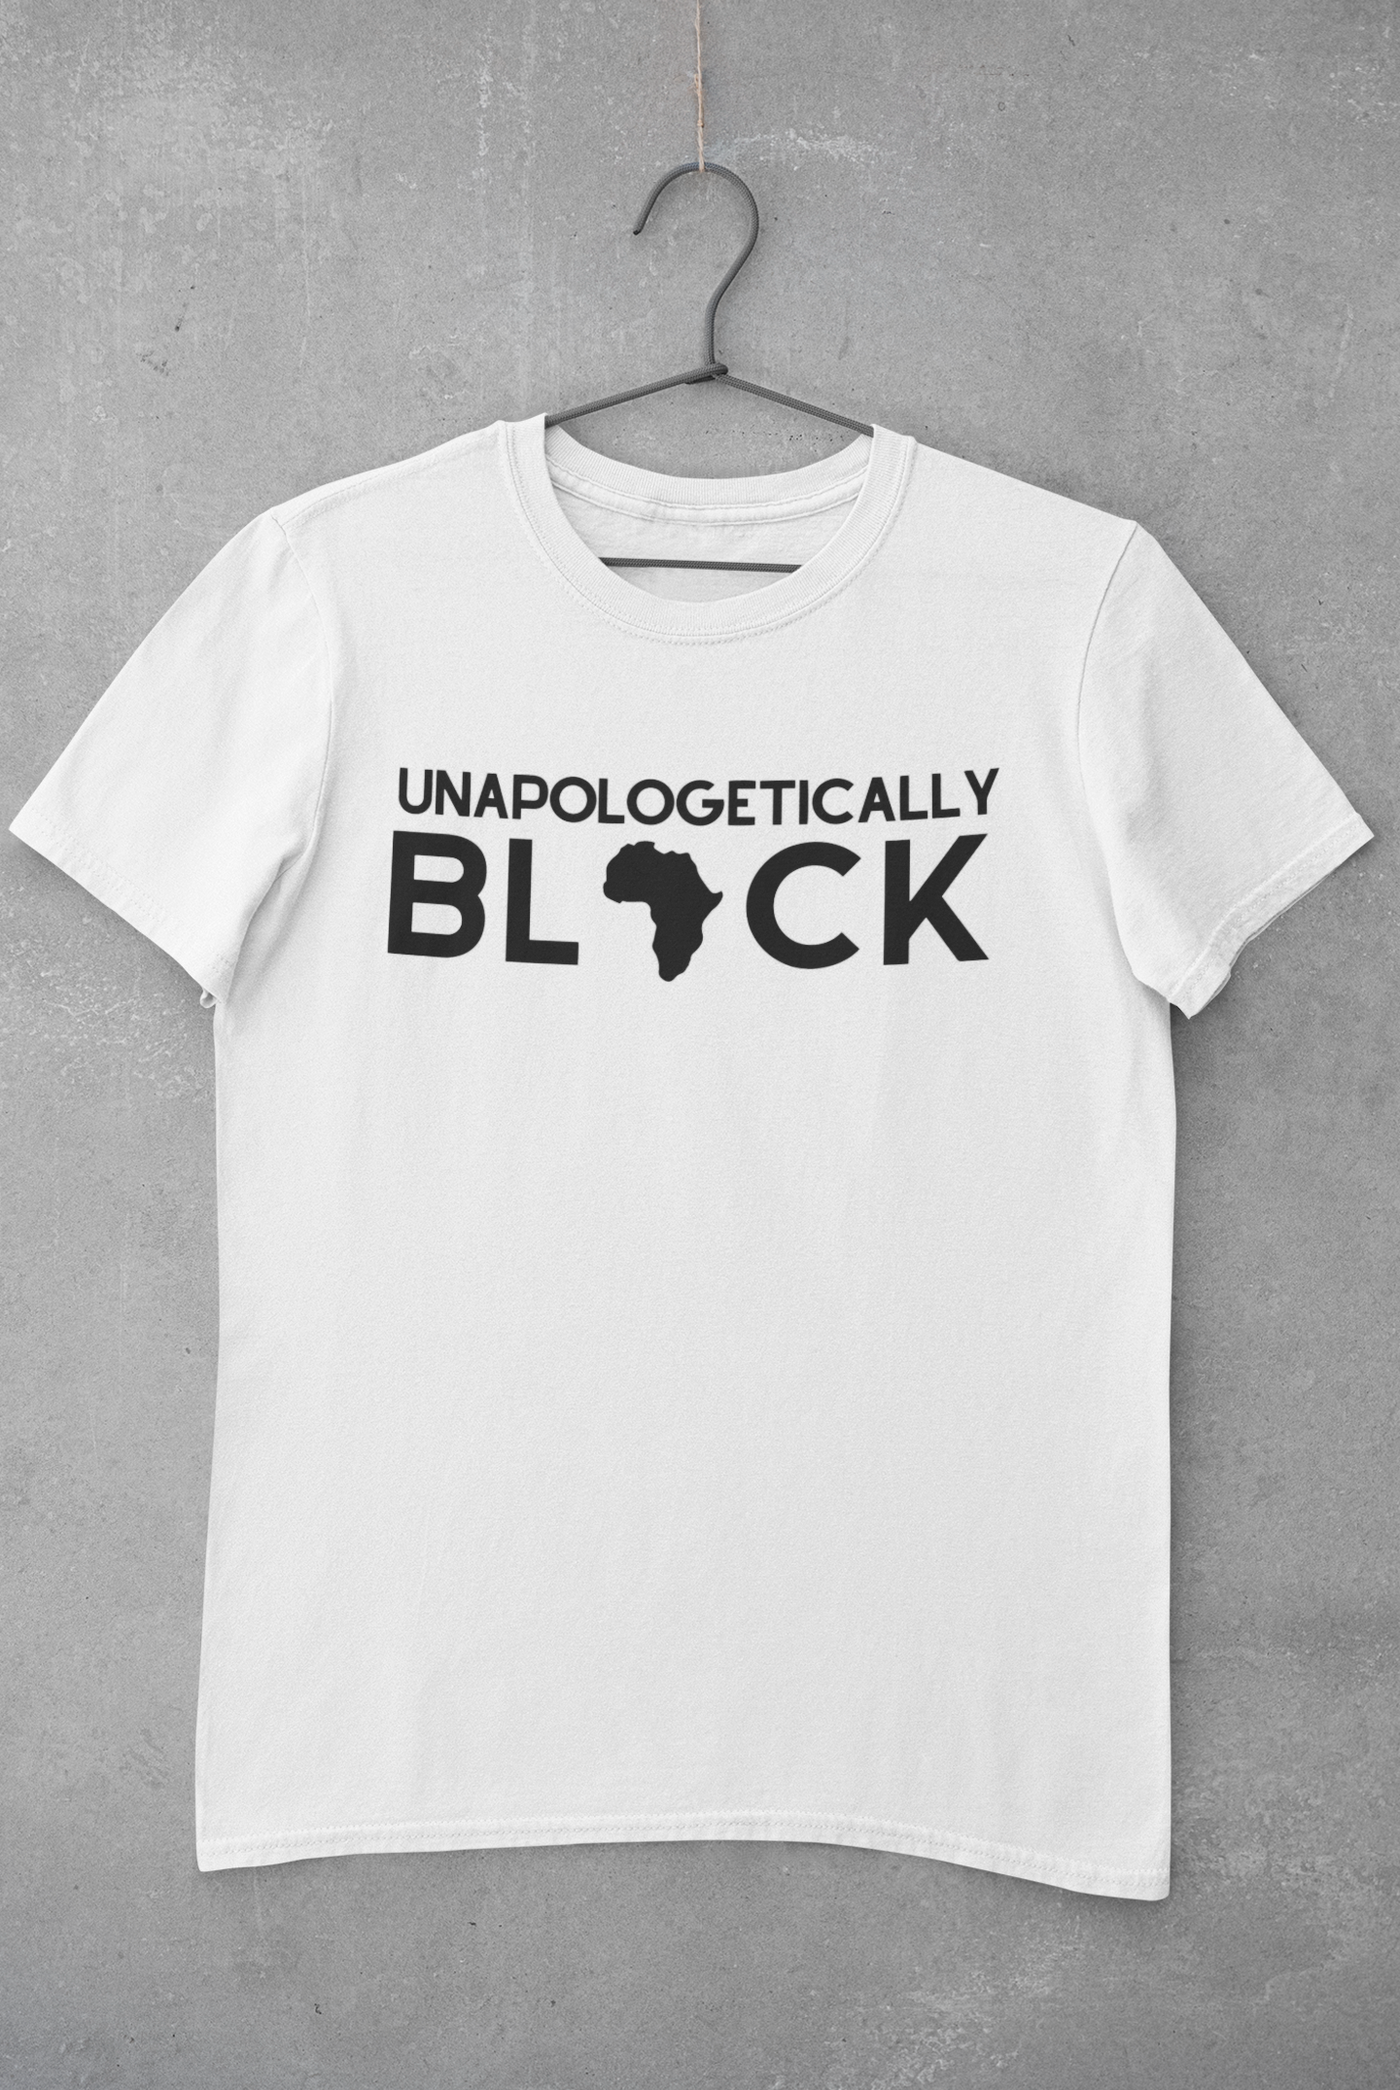 "UNAPOLOGETICALLY BLACK" T-Shirt